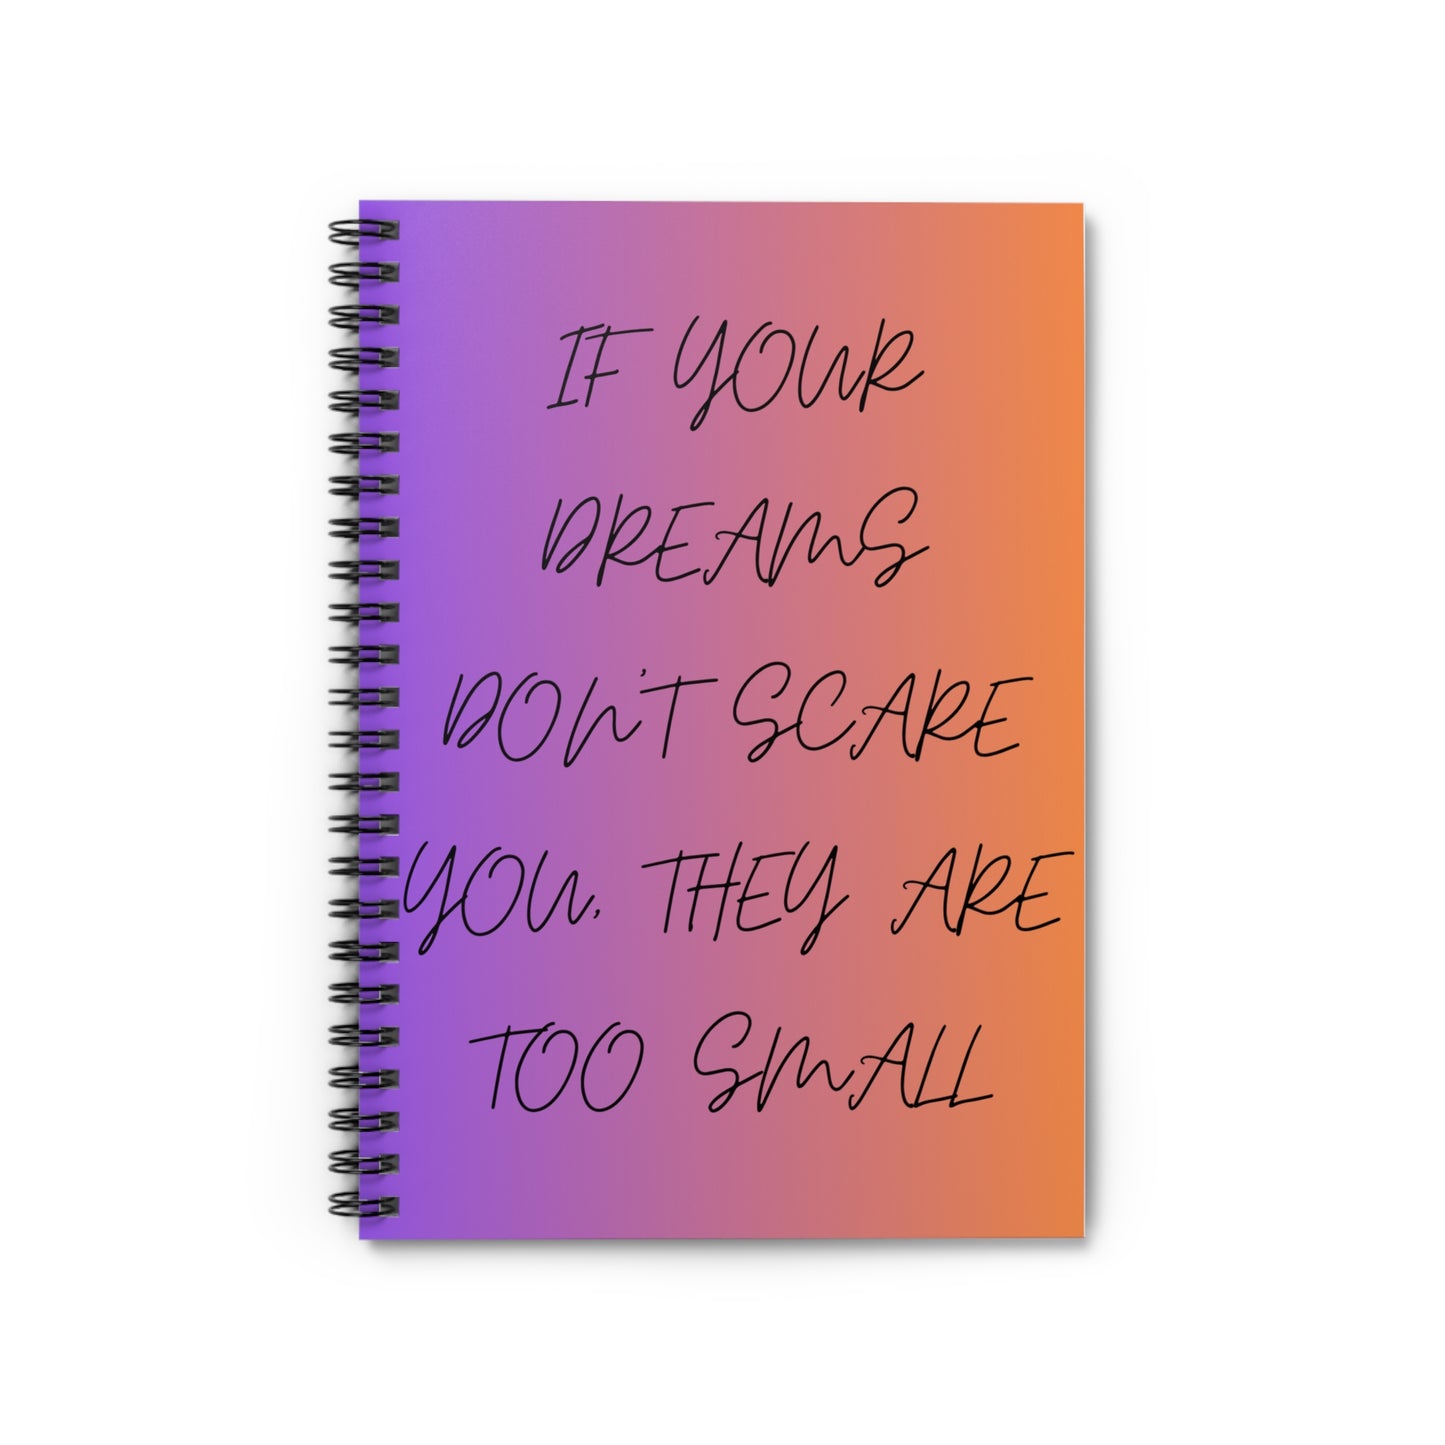 If your dreams don't scare you, they are too small